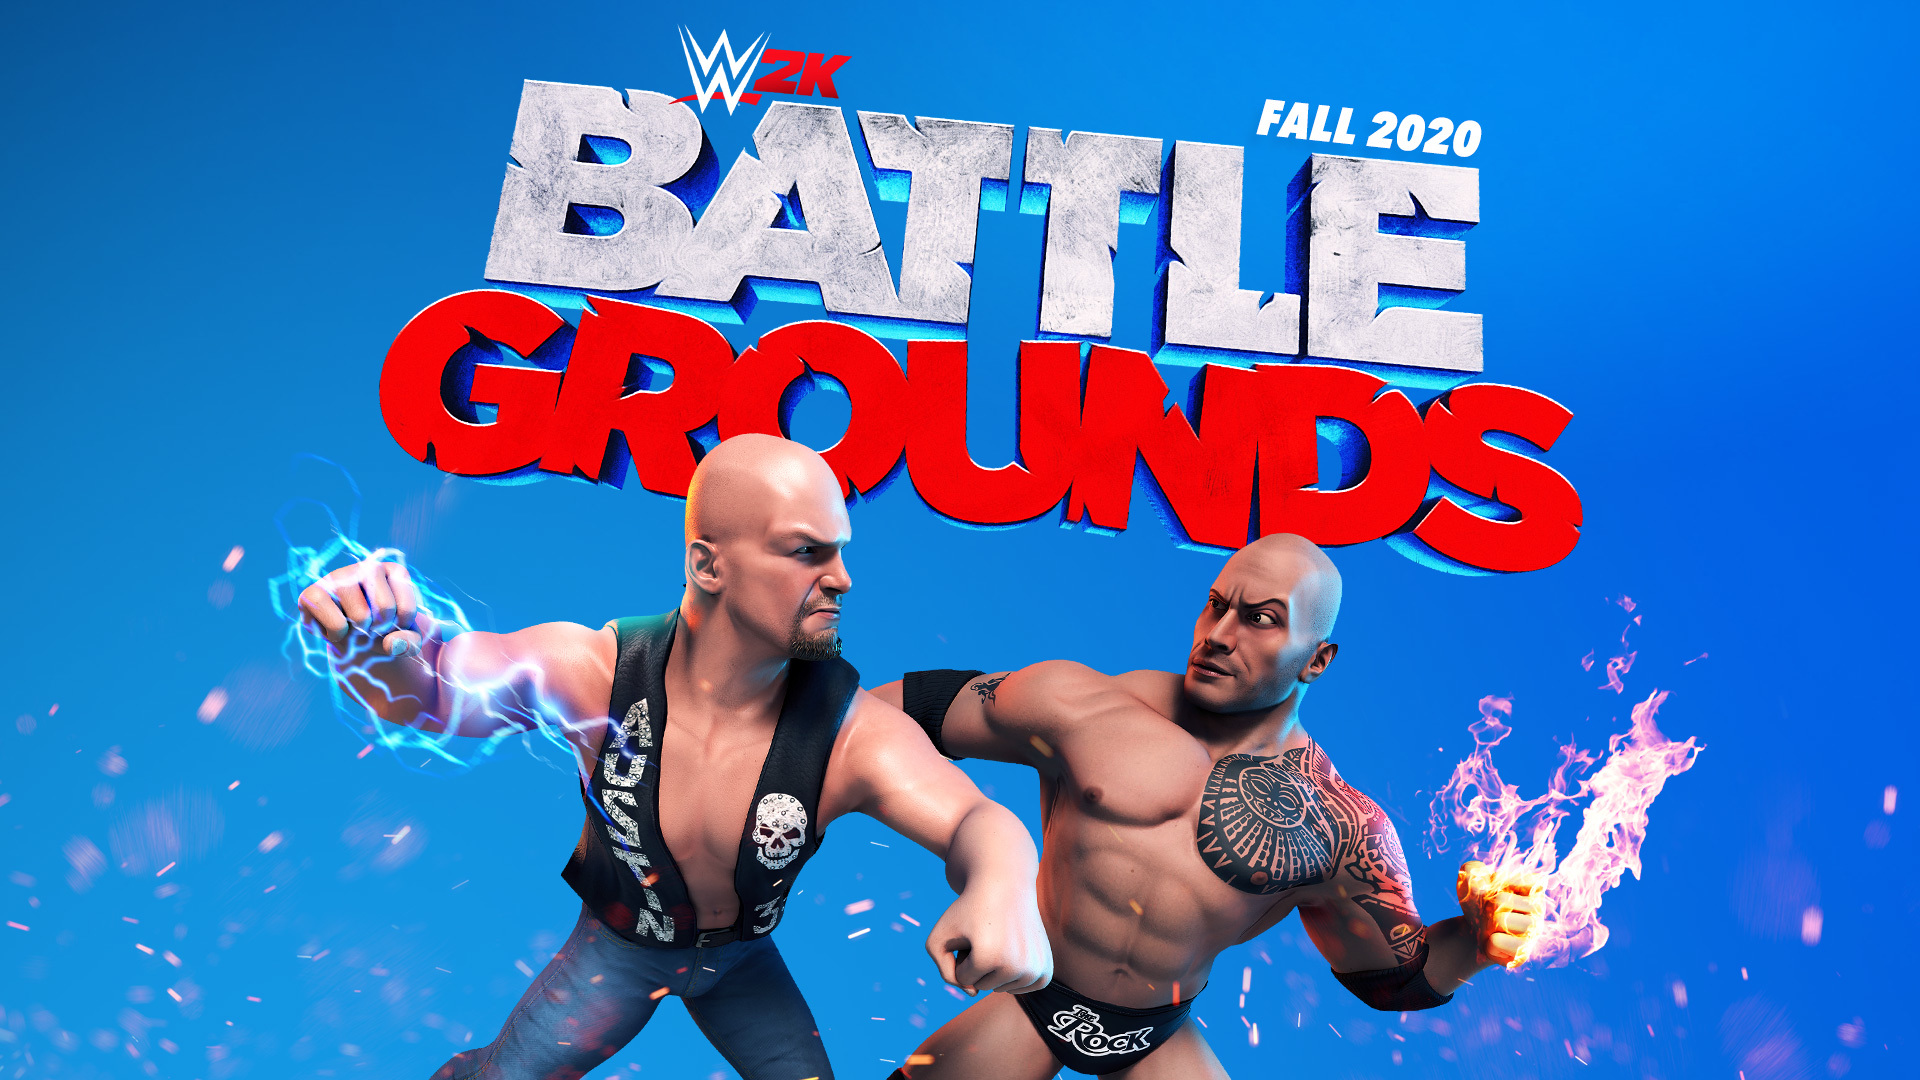 Jerry Lawler &Mauro Ranallo Call The Action Of WWE 2K Battlegrounds